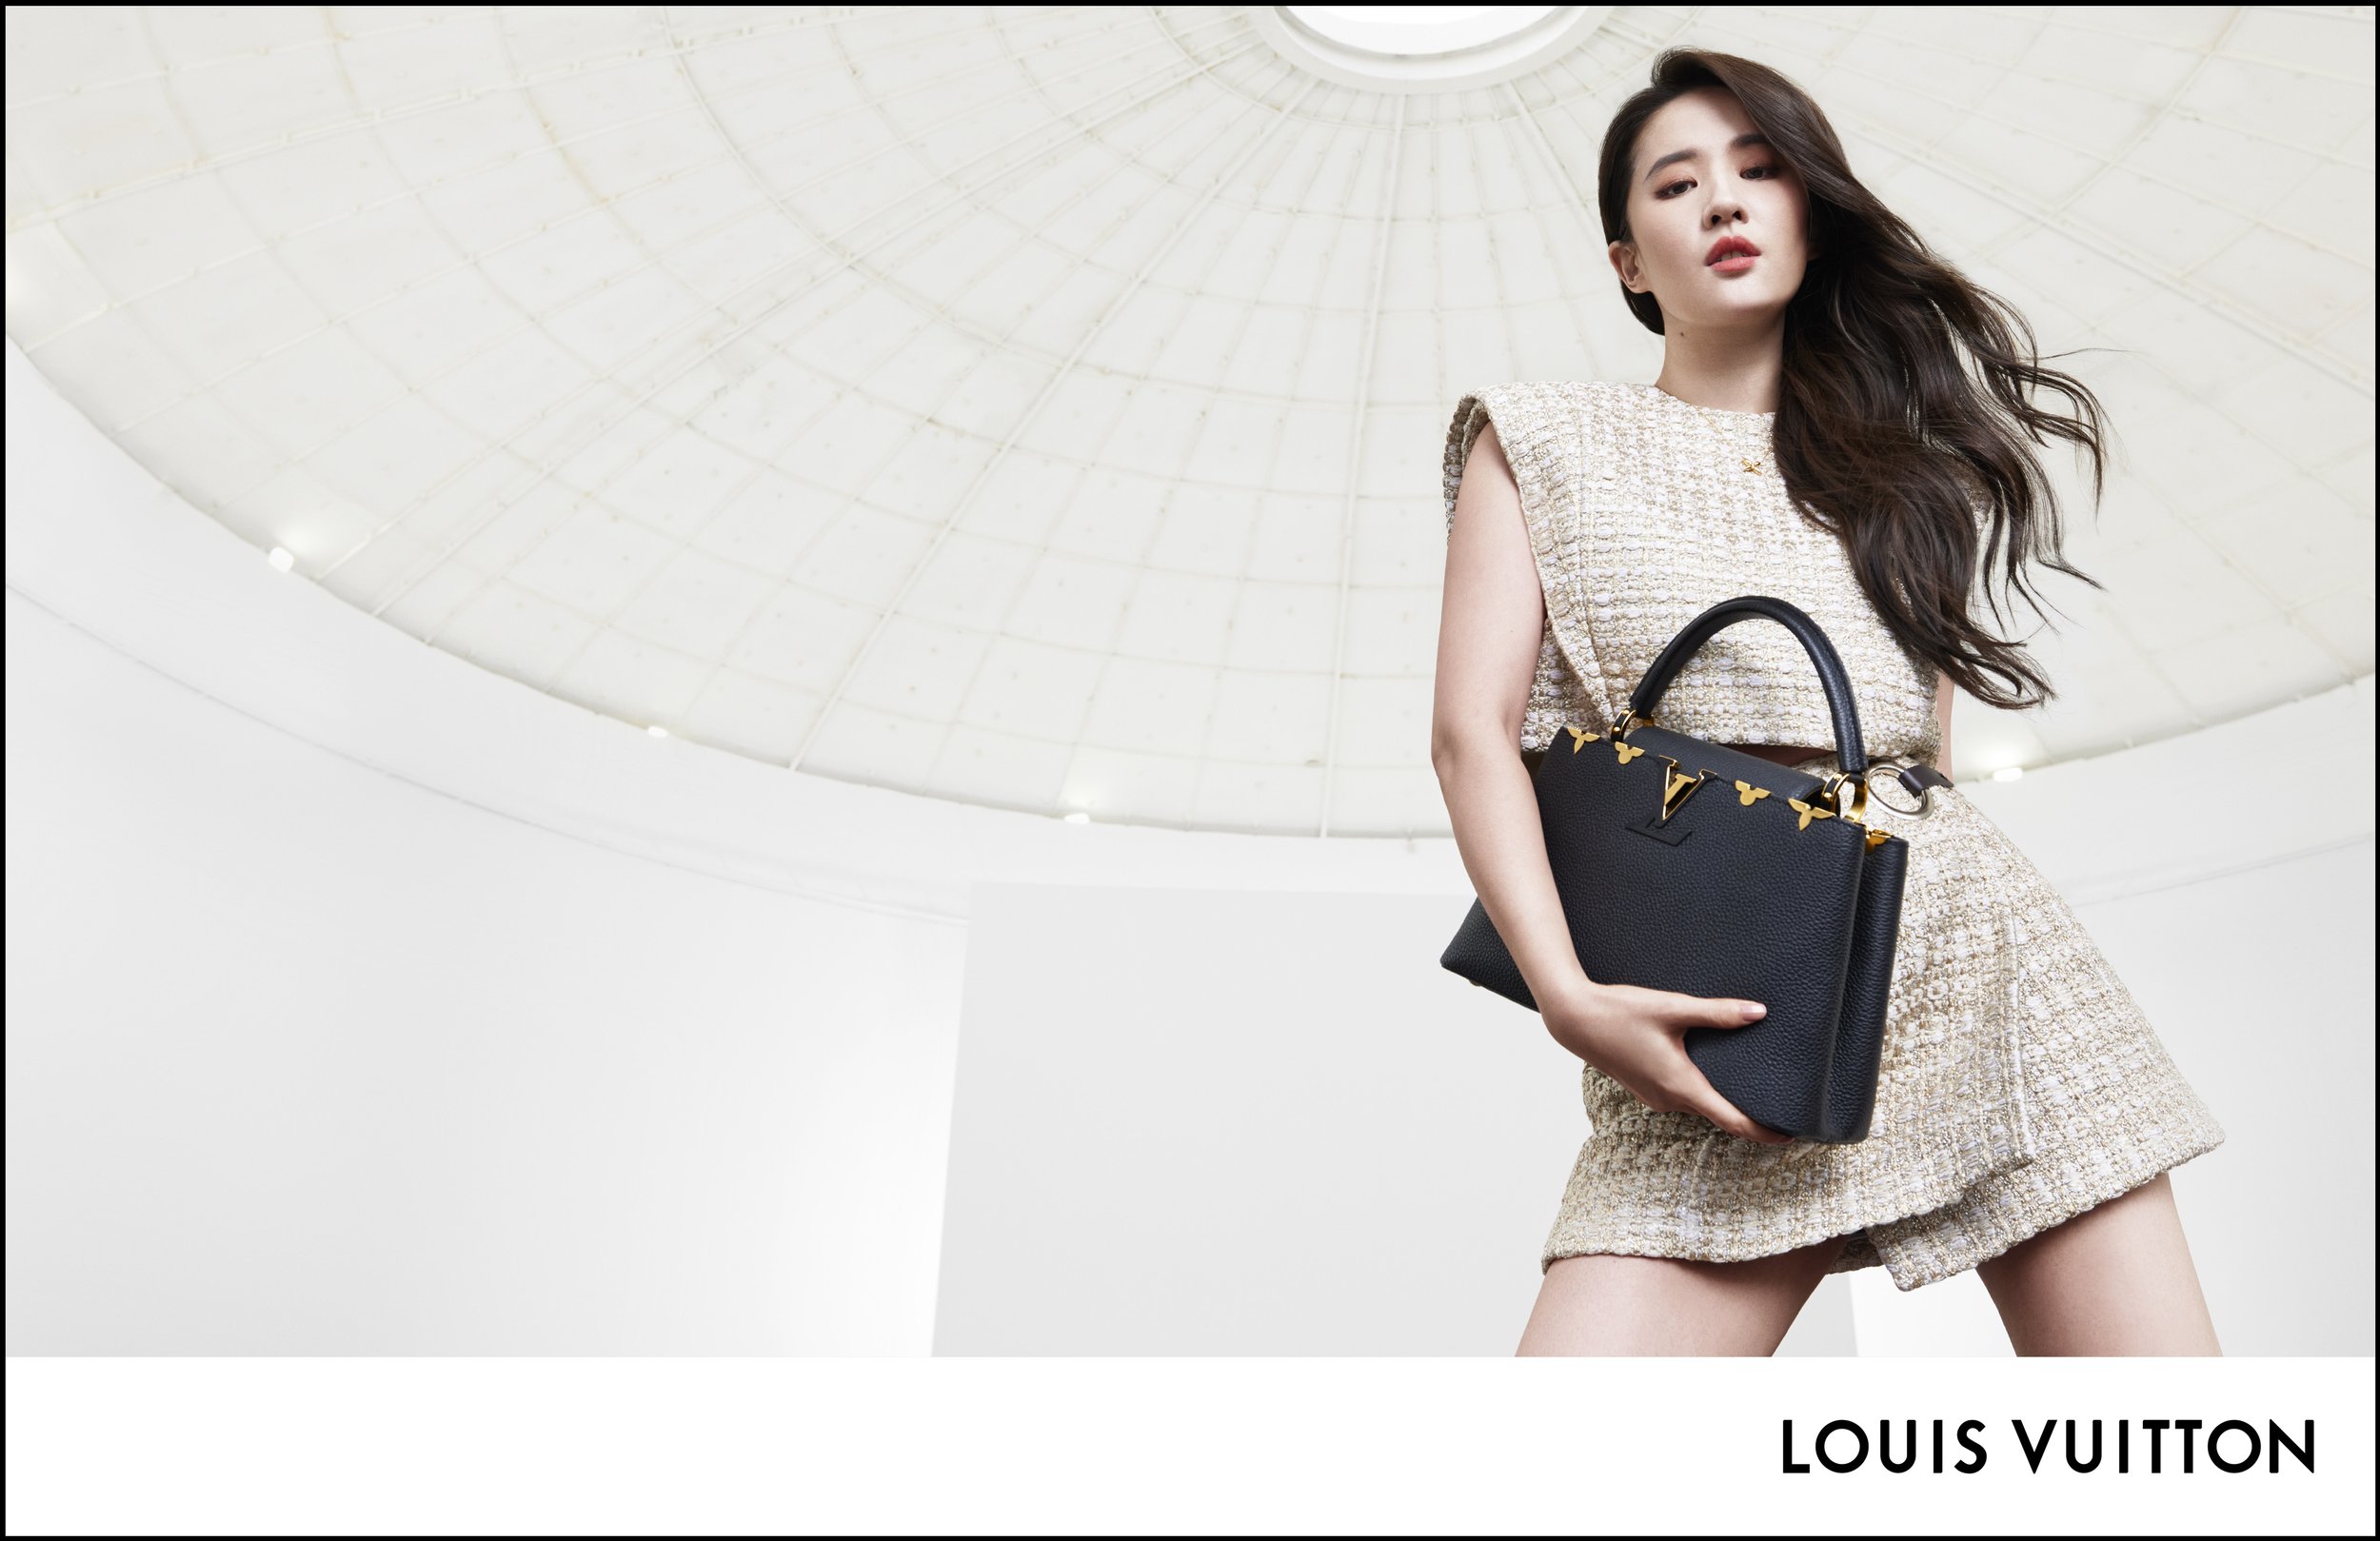 BLACKPINK Are The New Models For Louis Vuitton And The Pics Are